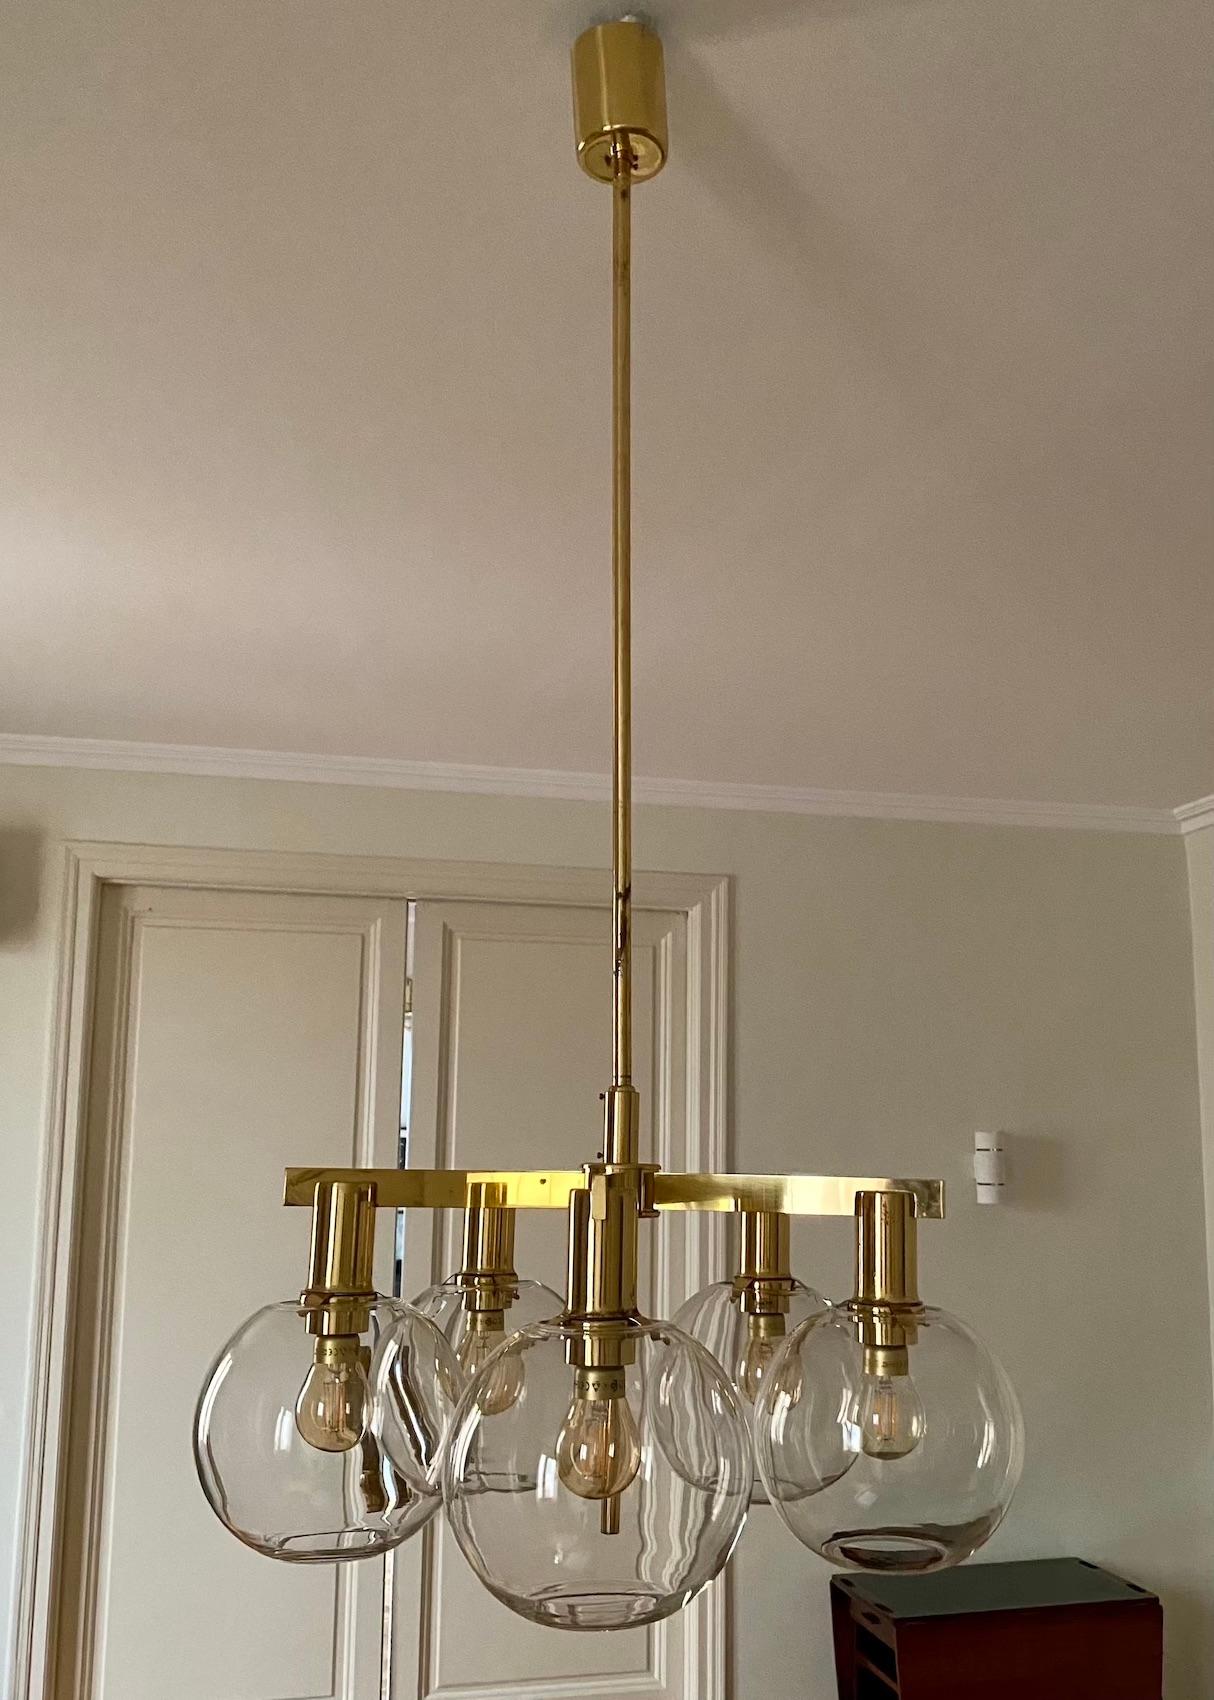 Large brass chandelier by Hans-Agne Jakobsson. Frame made of brass. Five arms with round glass globes. The height of the rod can be shortened on request.